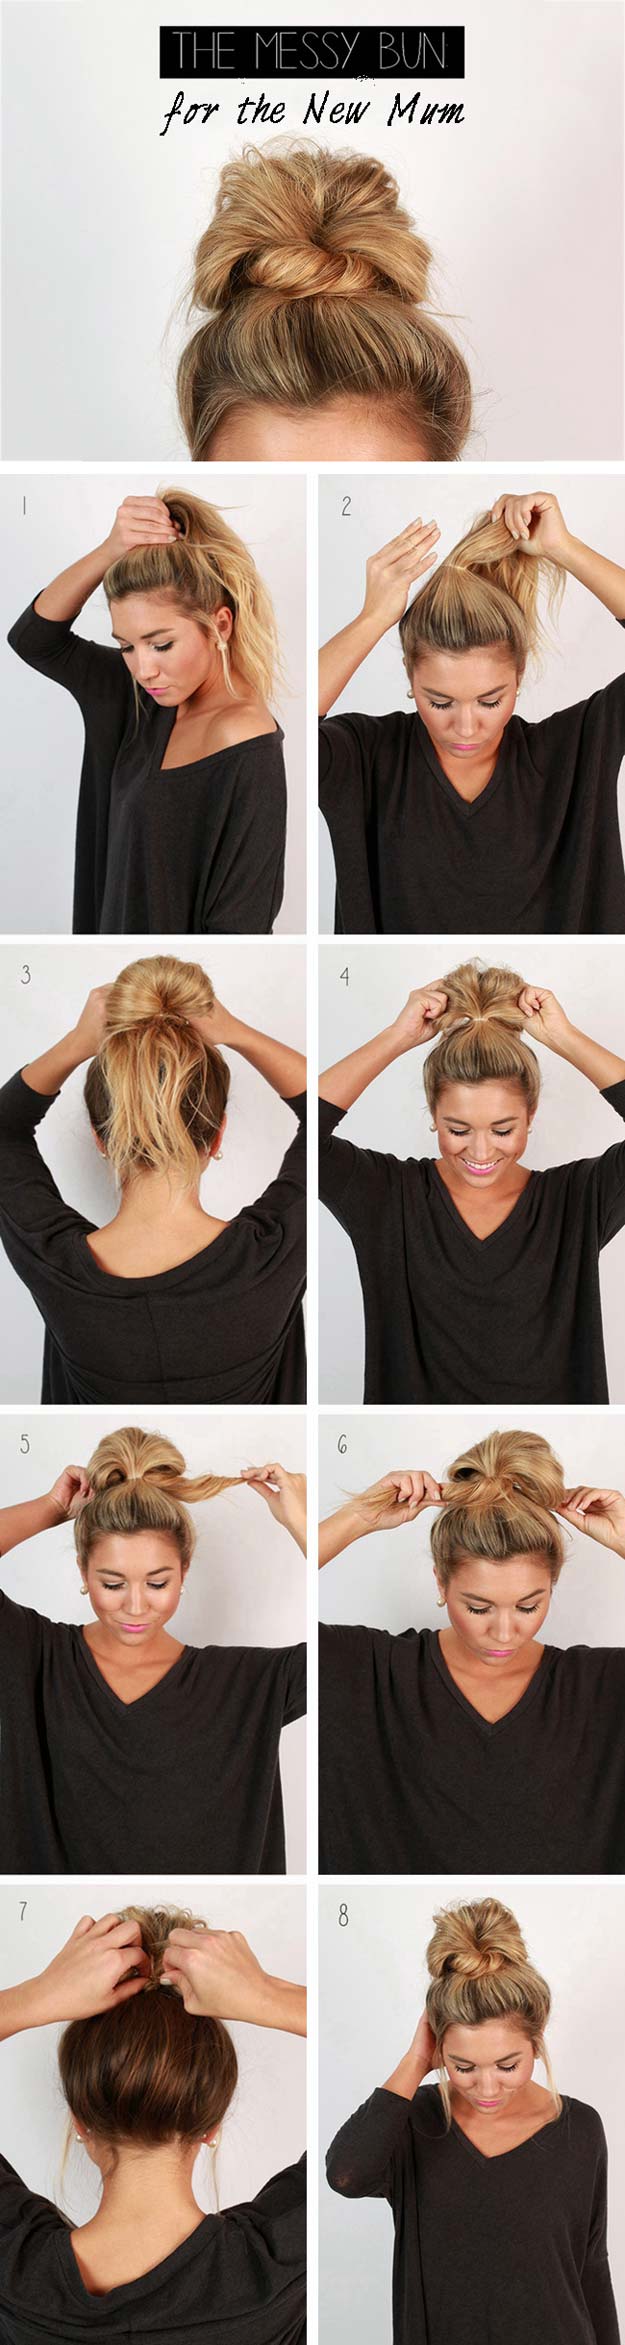 Cool and Easy DIY Hairstyles - Messy Bun - Quick and Easy Ideas for Back to School Styles for Medium, Short and Long Hair - Fun Tips and Best Step by Step Tutorials for Teens, Prom, Weddings, Special Occasions and Work. Up dos, Braids, Top Knots and Buns, Super Summer Looks #hairstyles #hair #teens #easyhairstyles #diy #beauty